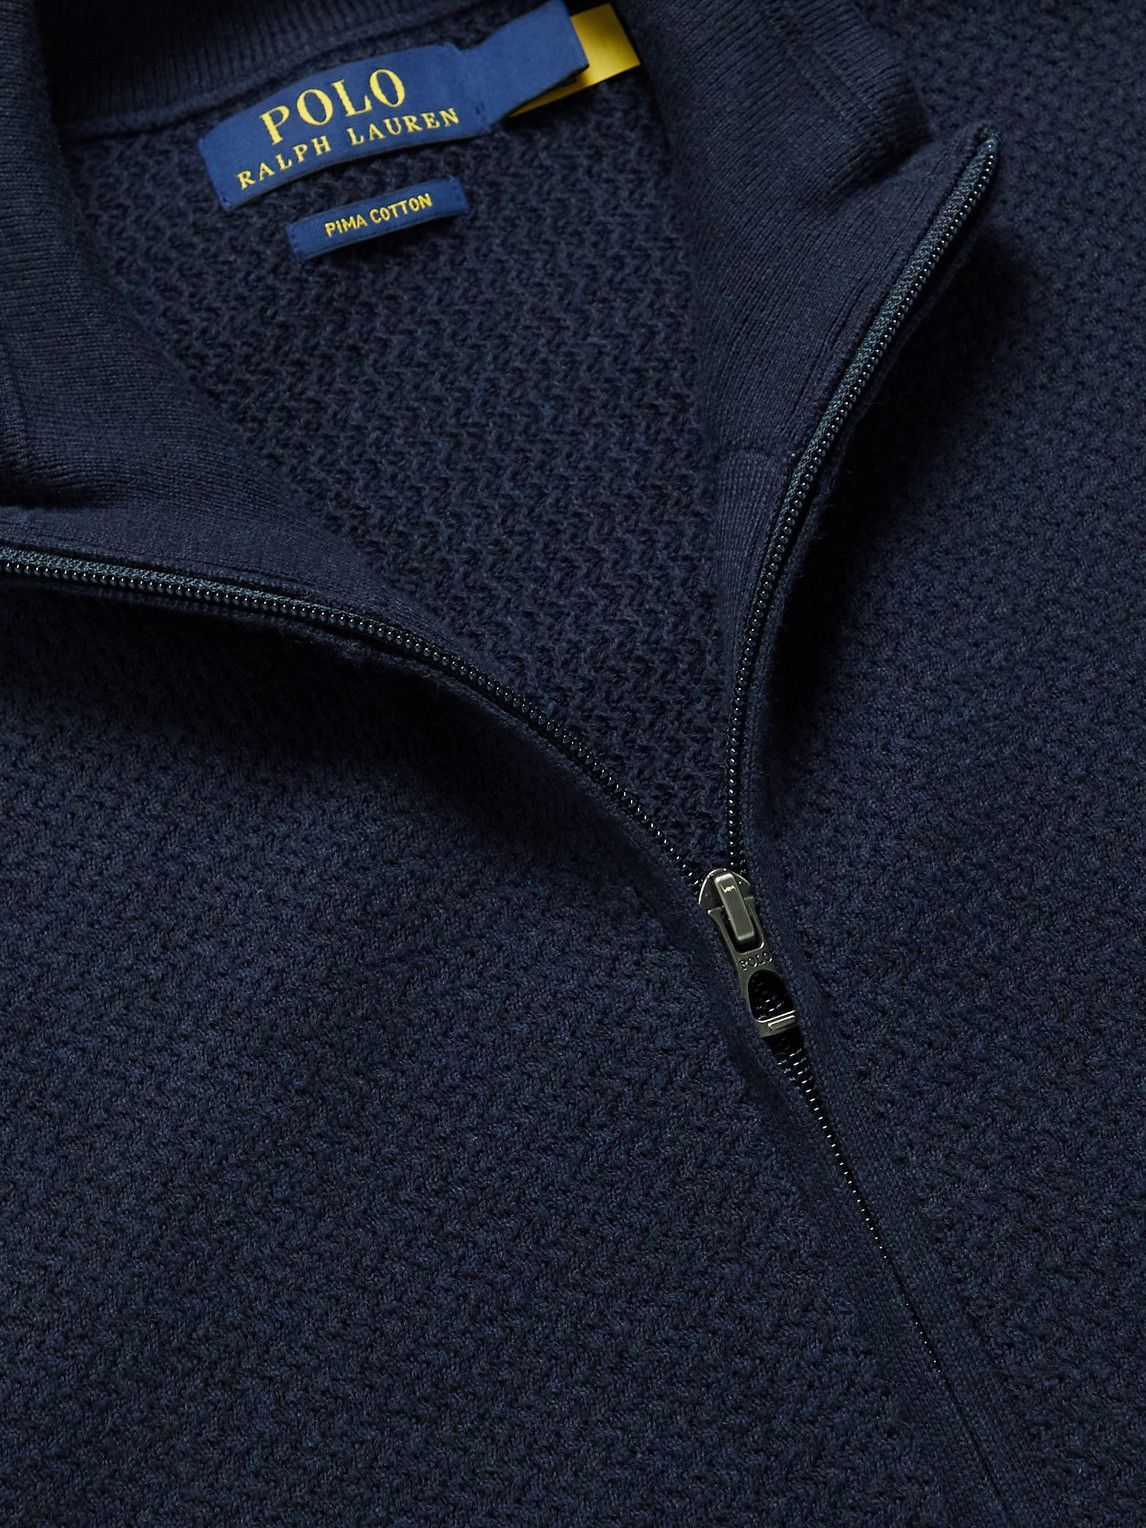 Polo Ralph Lauren - Logo-Embroidered Waffle-Knit Cotton Zip-Up Cardigan - Blue